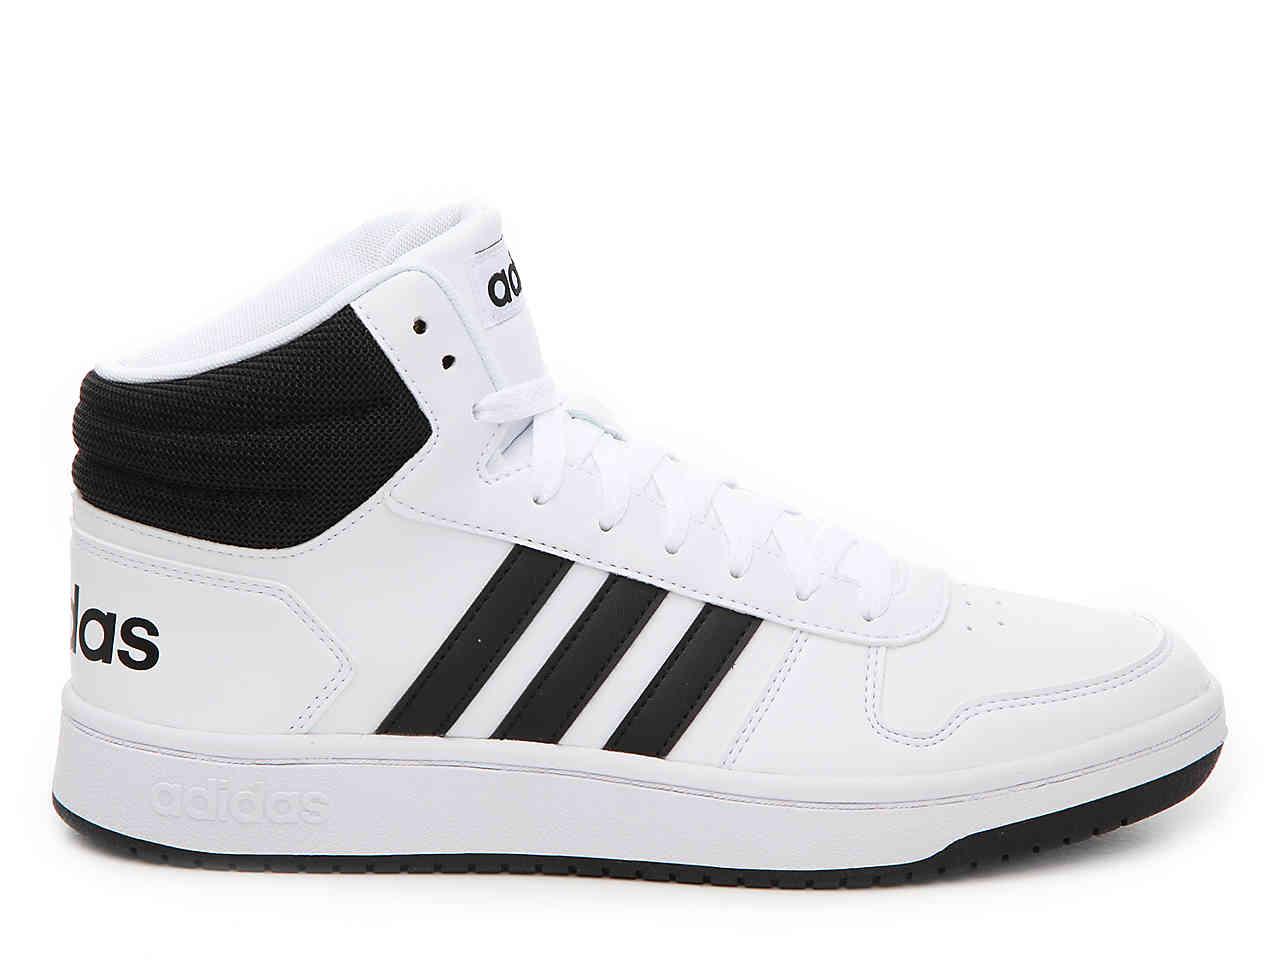 Lyst - adidas Hoops 2.0 Mid-top Sneaker in White for Men